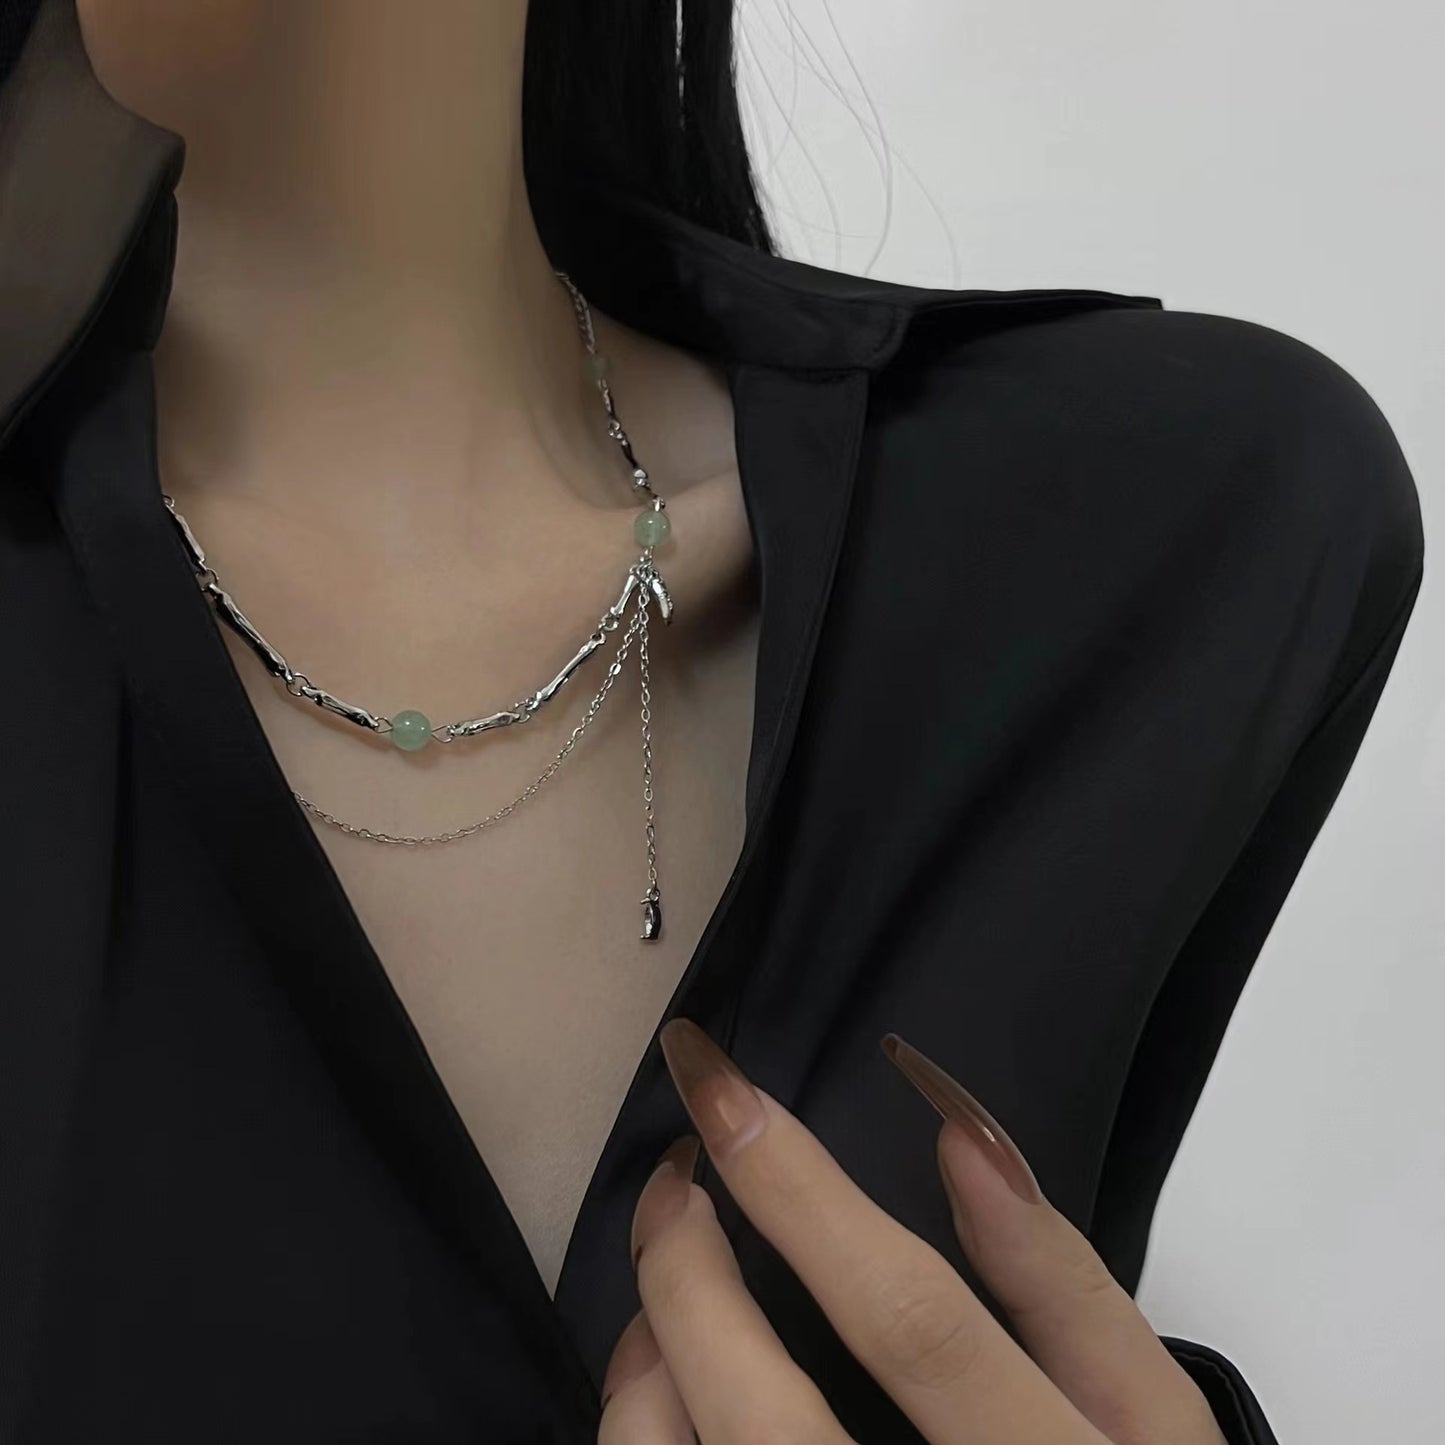 New Chinese style bamboo knot water drop tassel necklace with a male and female niche design, fashionable, sweet and cool collarbone chain trend